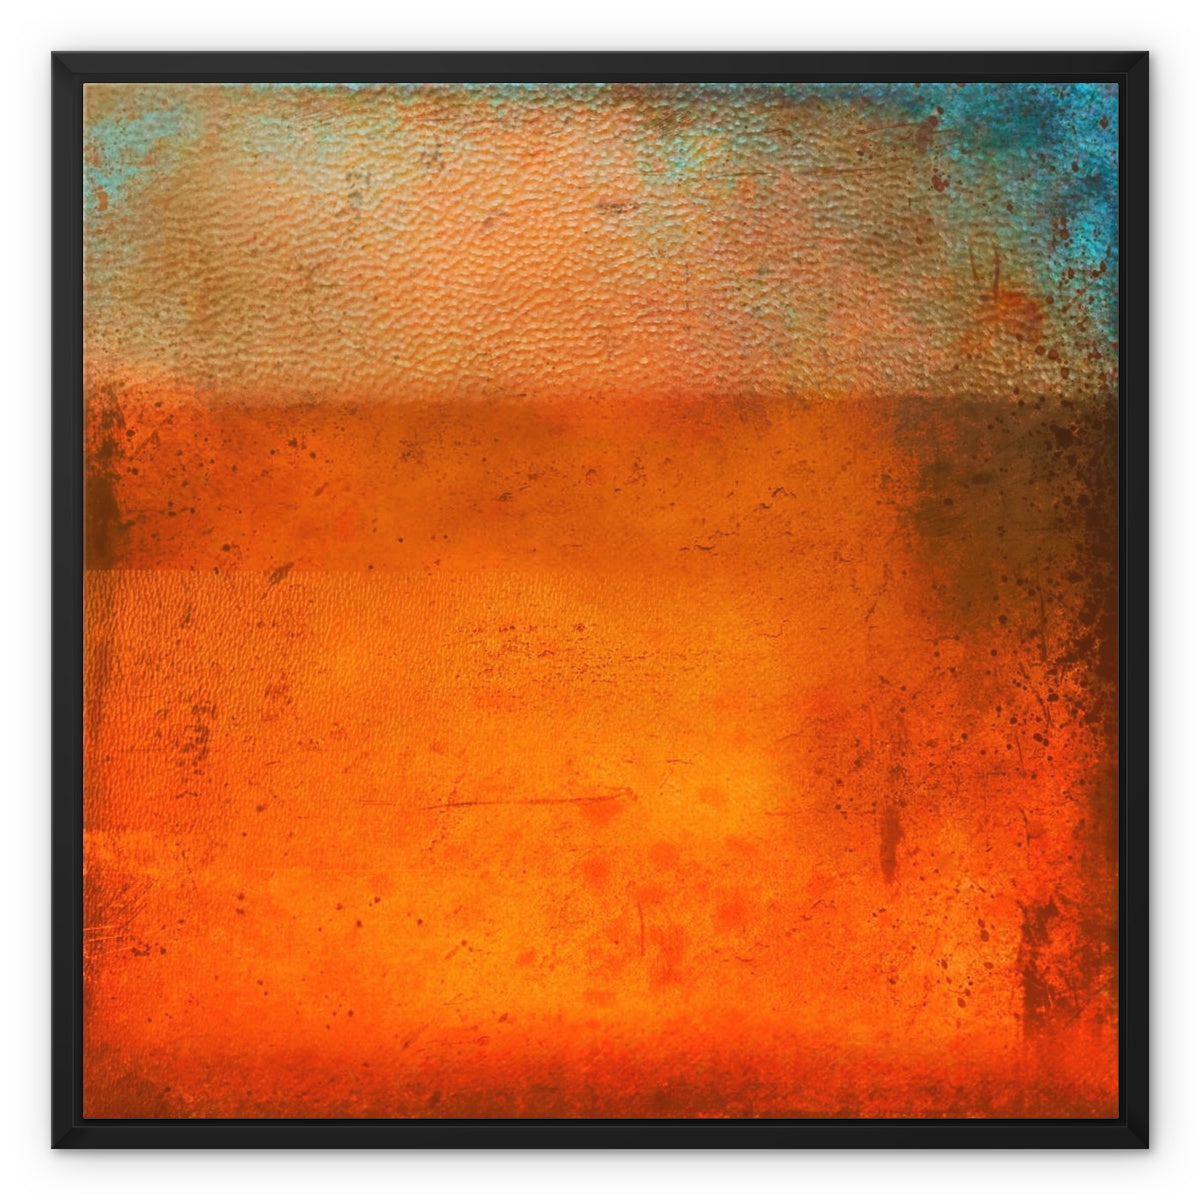 Sunset Horizon Abstract Painting | Framed Canvas From Scotland-Floating Framed Canvas Prints-Abstract & Impressionistic Art Gallery-24"x24"-Paintings, Prints, Homeware, Art Gifts From Scotland By Scottish Artist Kevin Hunter